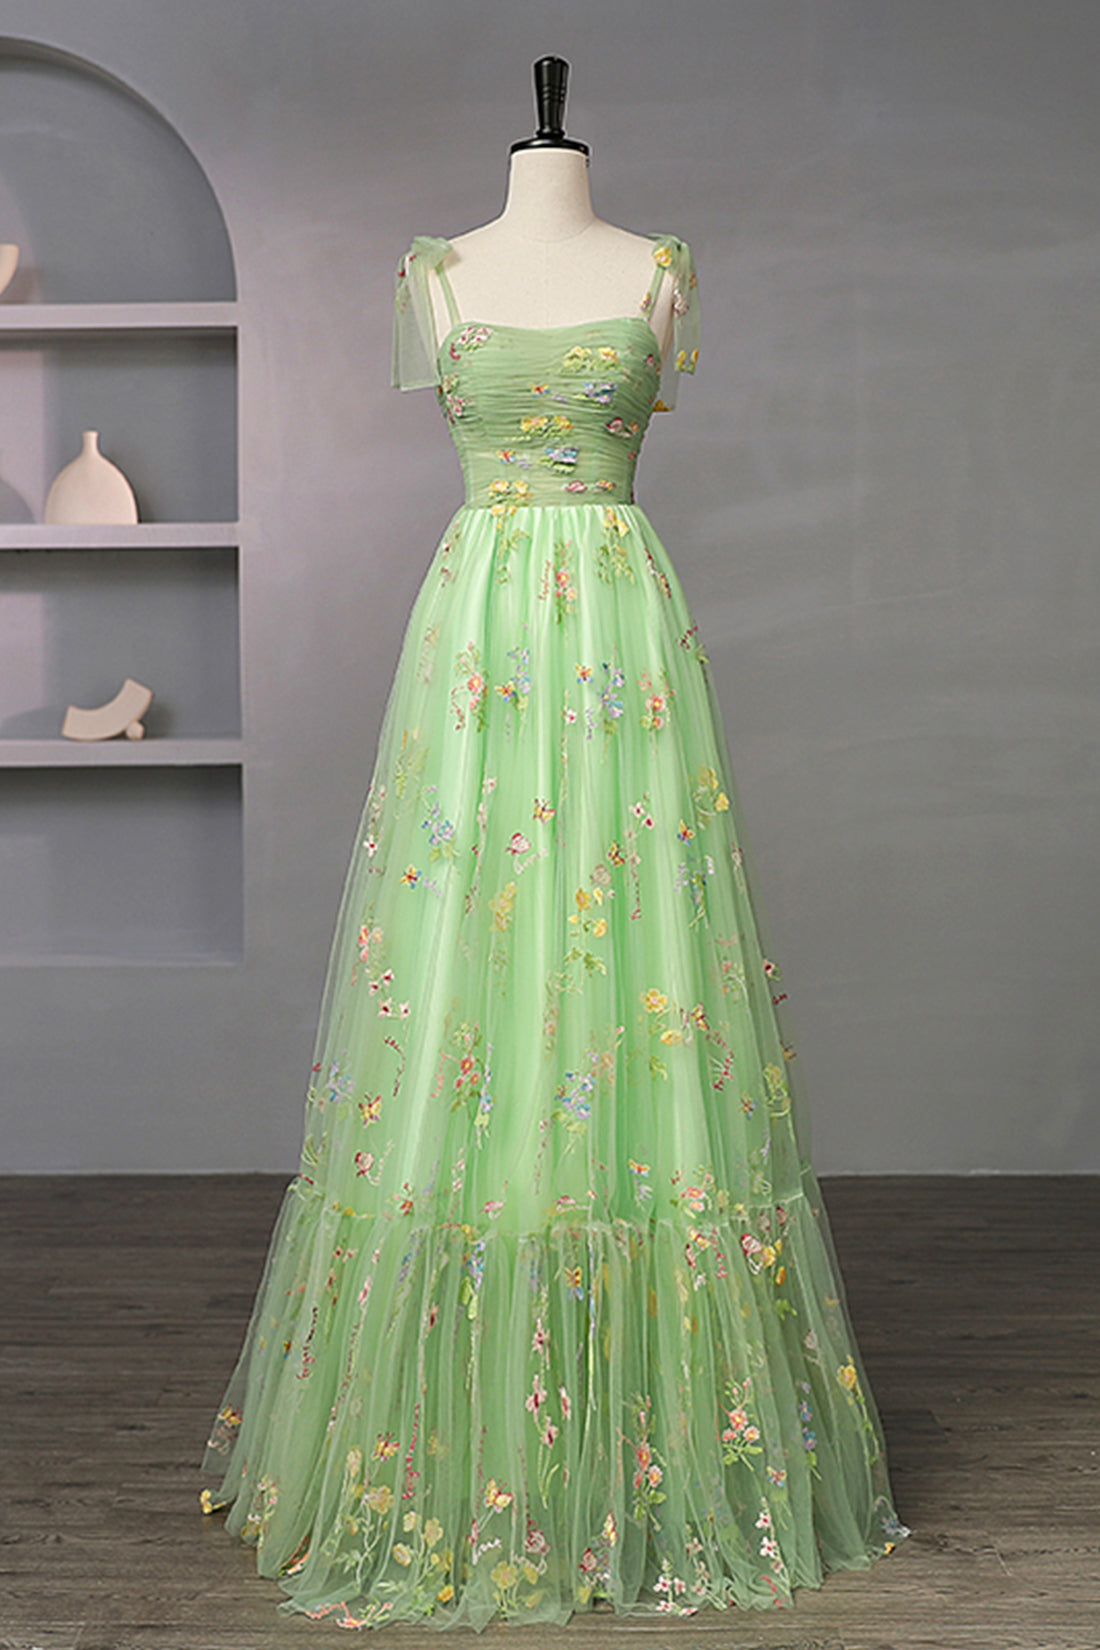 Green Floral Tulle Long Prom Dress, Beautiful A-Line Formal Evening Dress